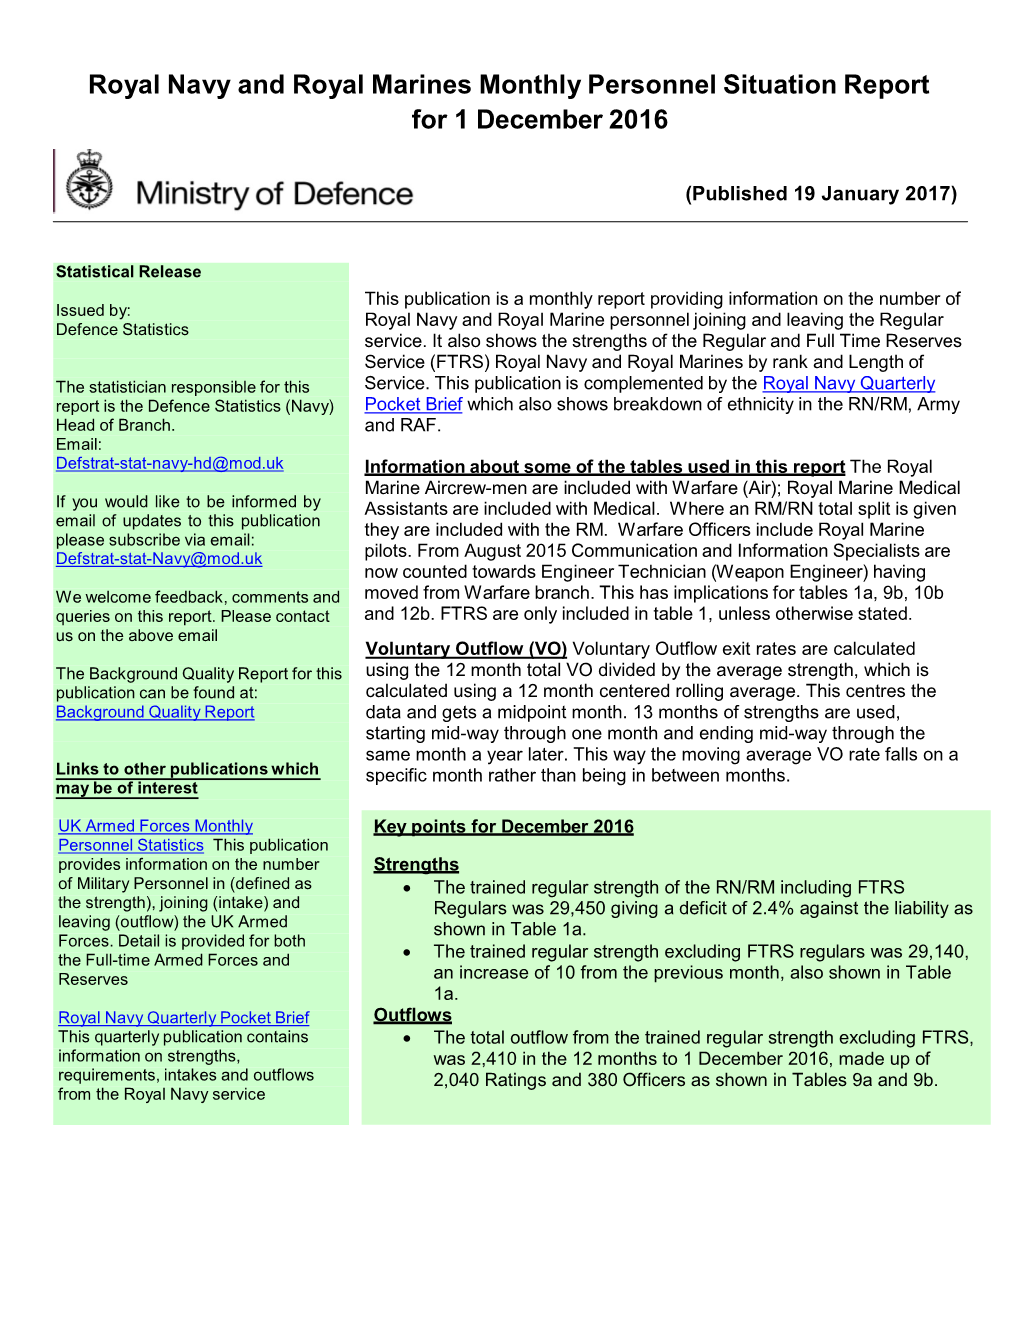 Royal Navy and Royal Marines Monthly Personnel Situation Report 1